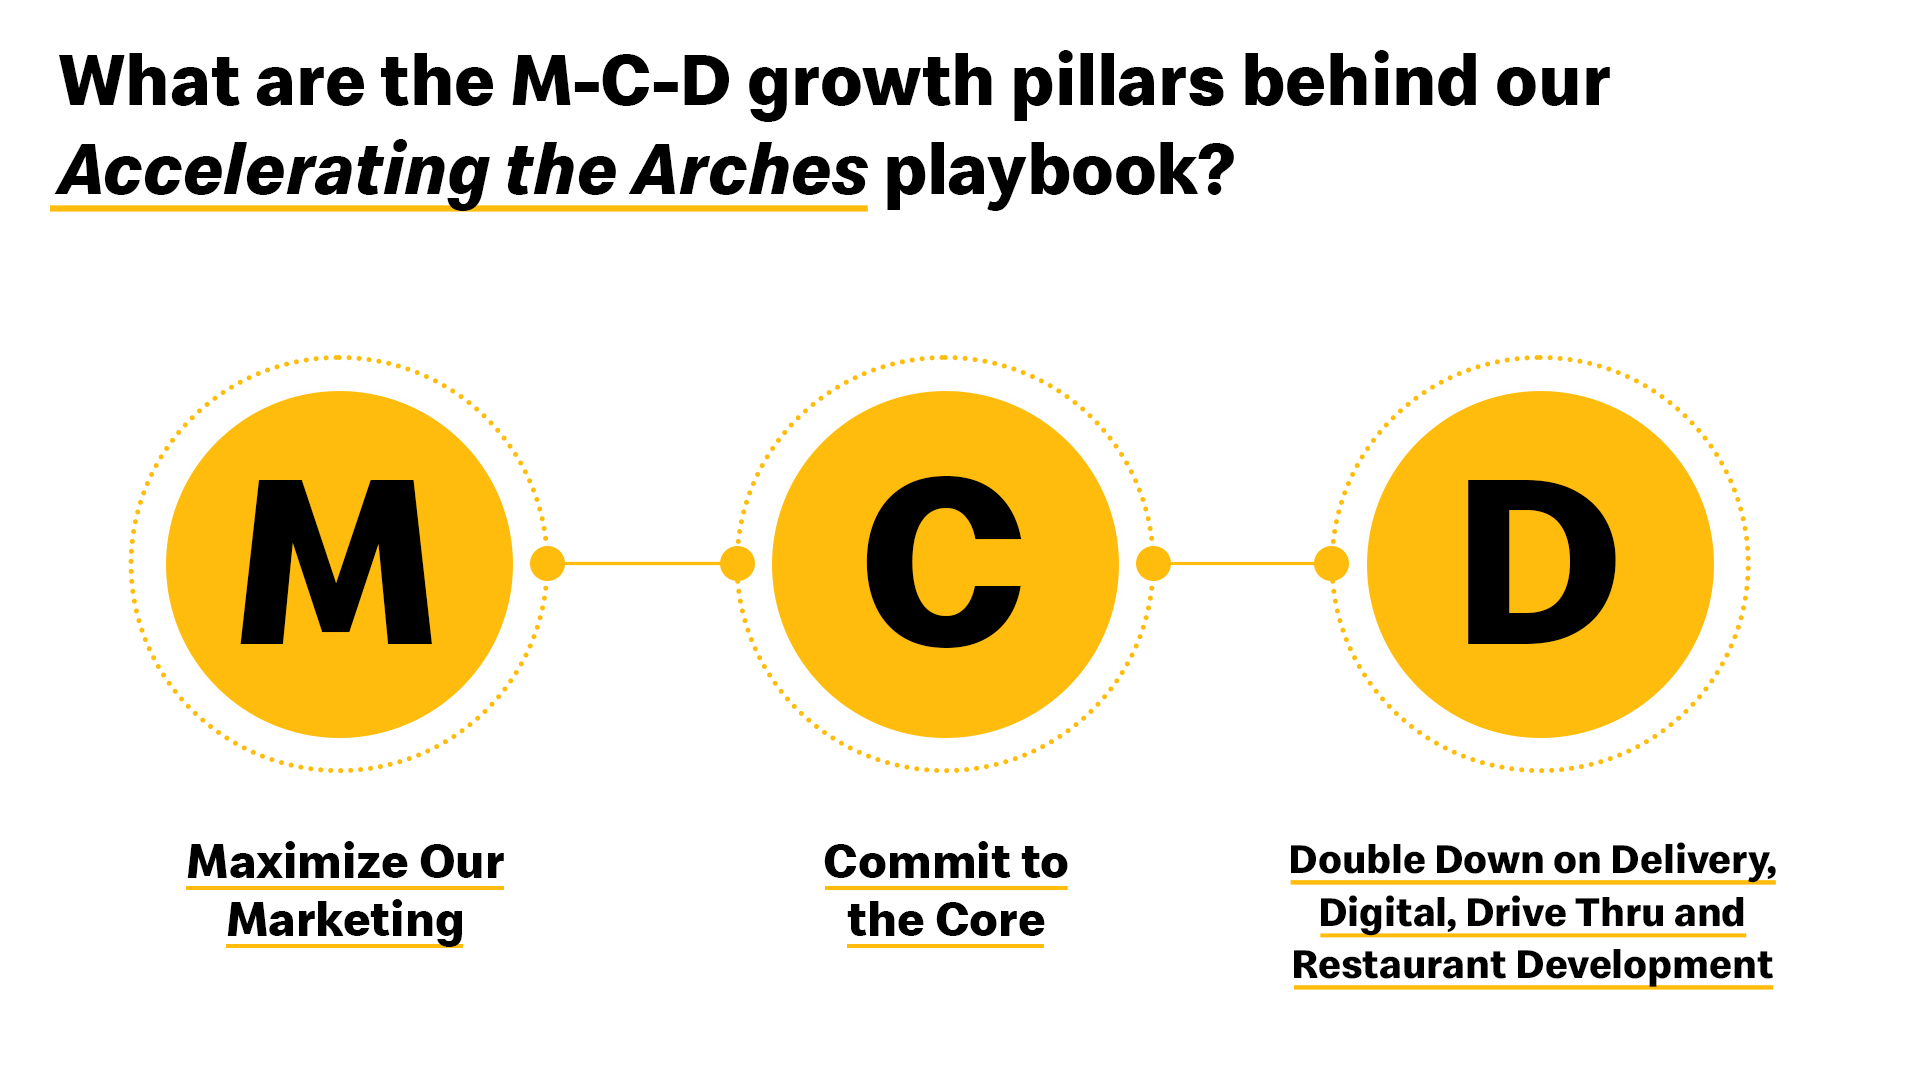 Graphic with text that reads: "What are the M-C-D growth pillarsbehind the Accelerating the Arches playbook? Maximizing Our Marketing; Commit to Core; and Double Down on Delivery, Digital Drive Thru and Restaurant Development.